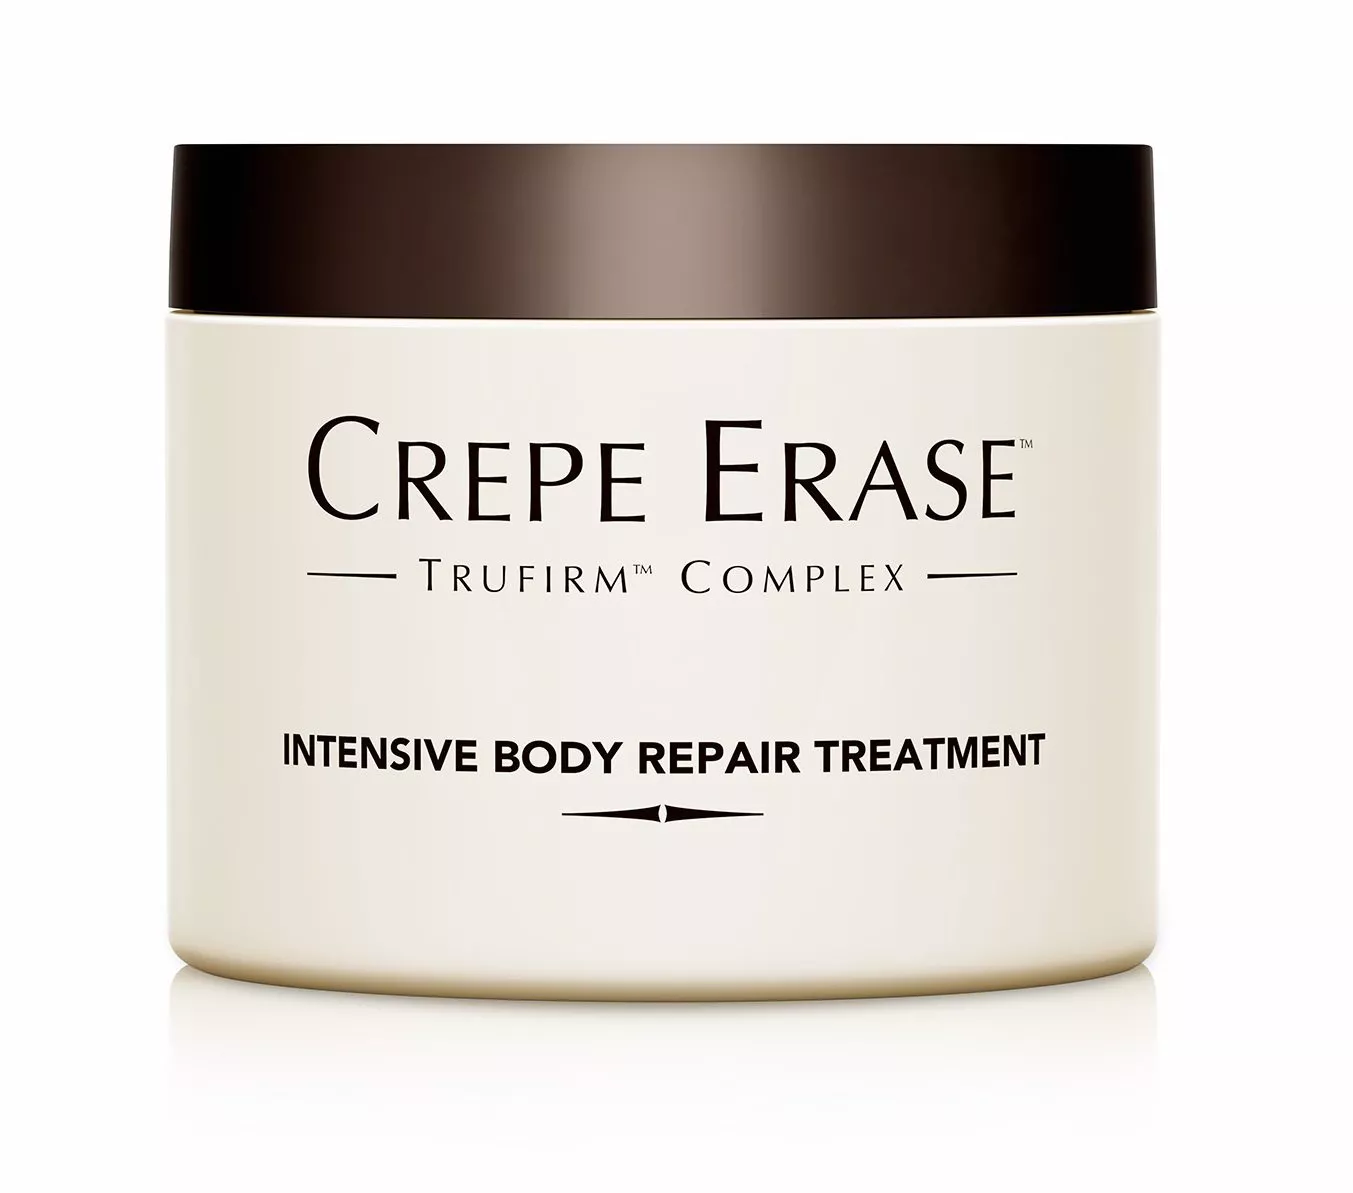 Crepe Erase Intensive Body Repair Treatment with TruFirm Complex